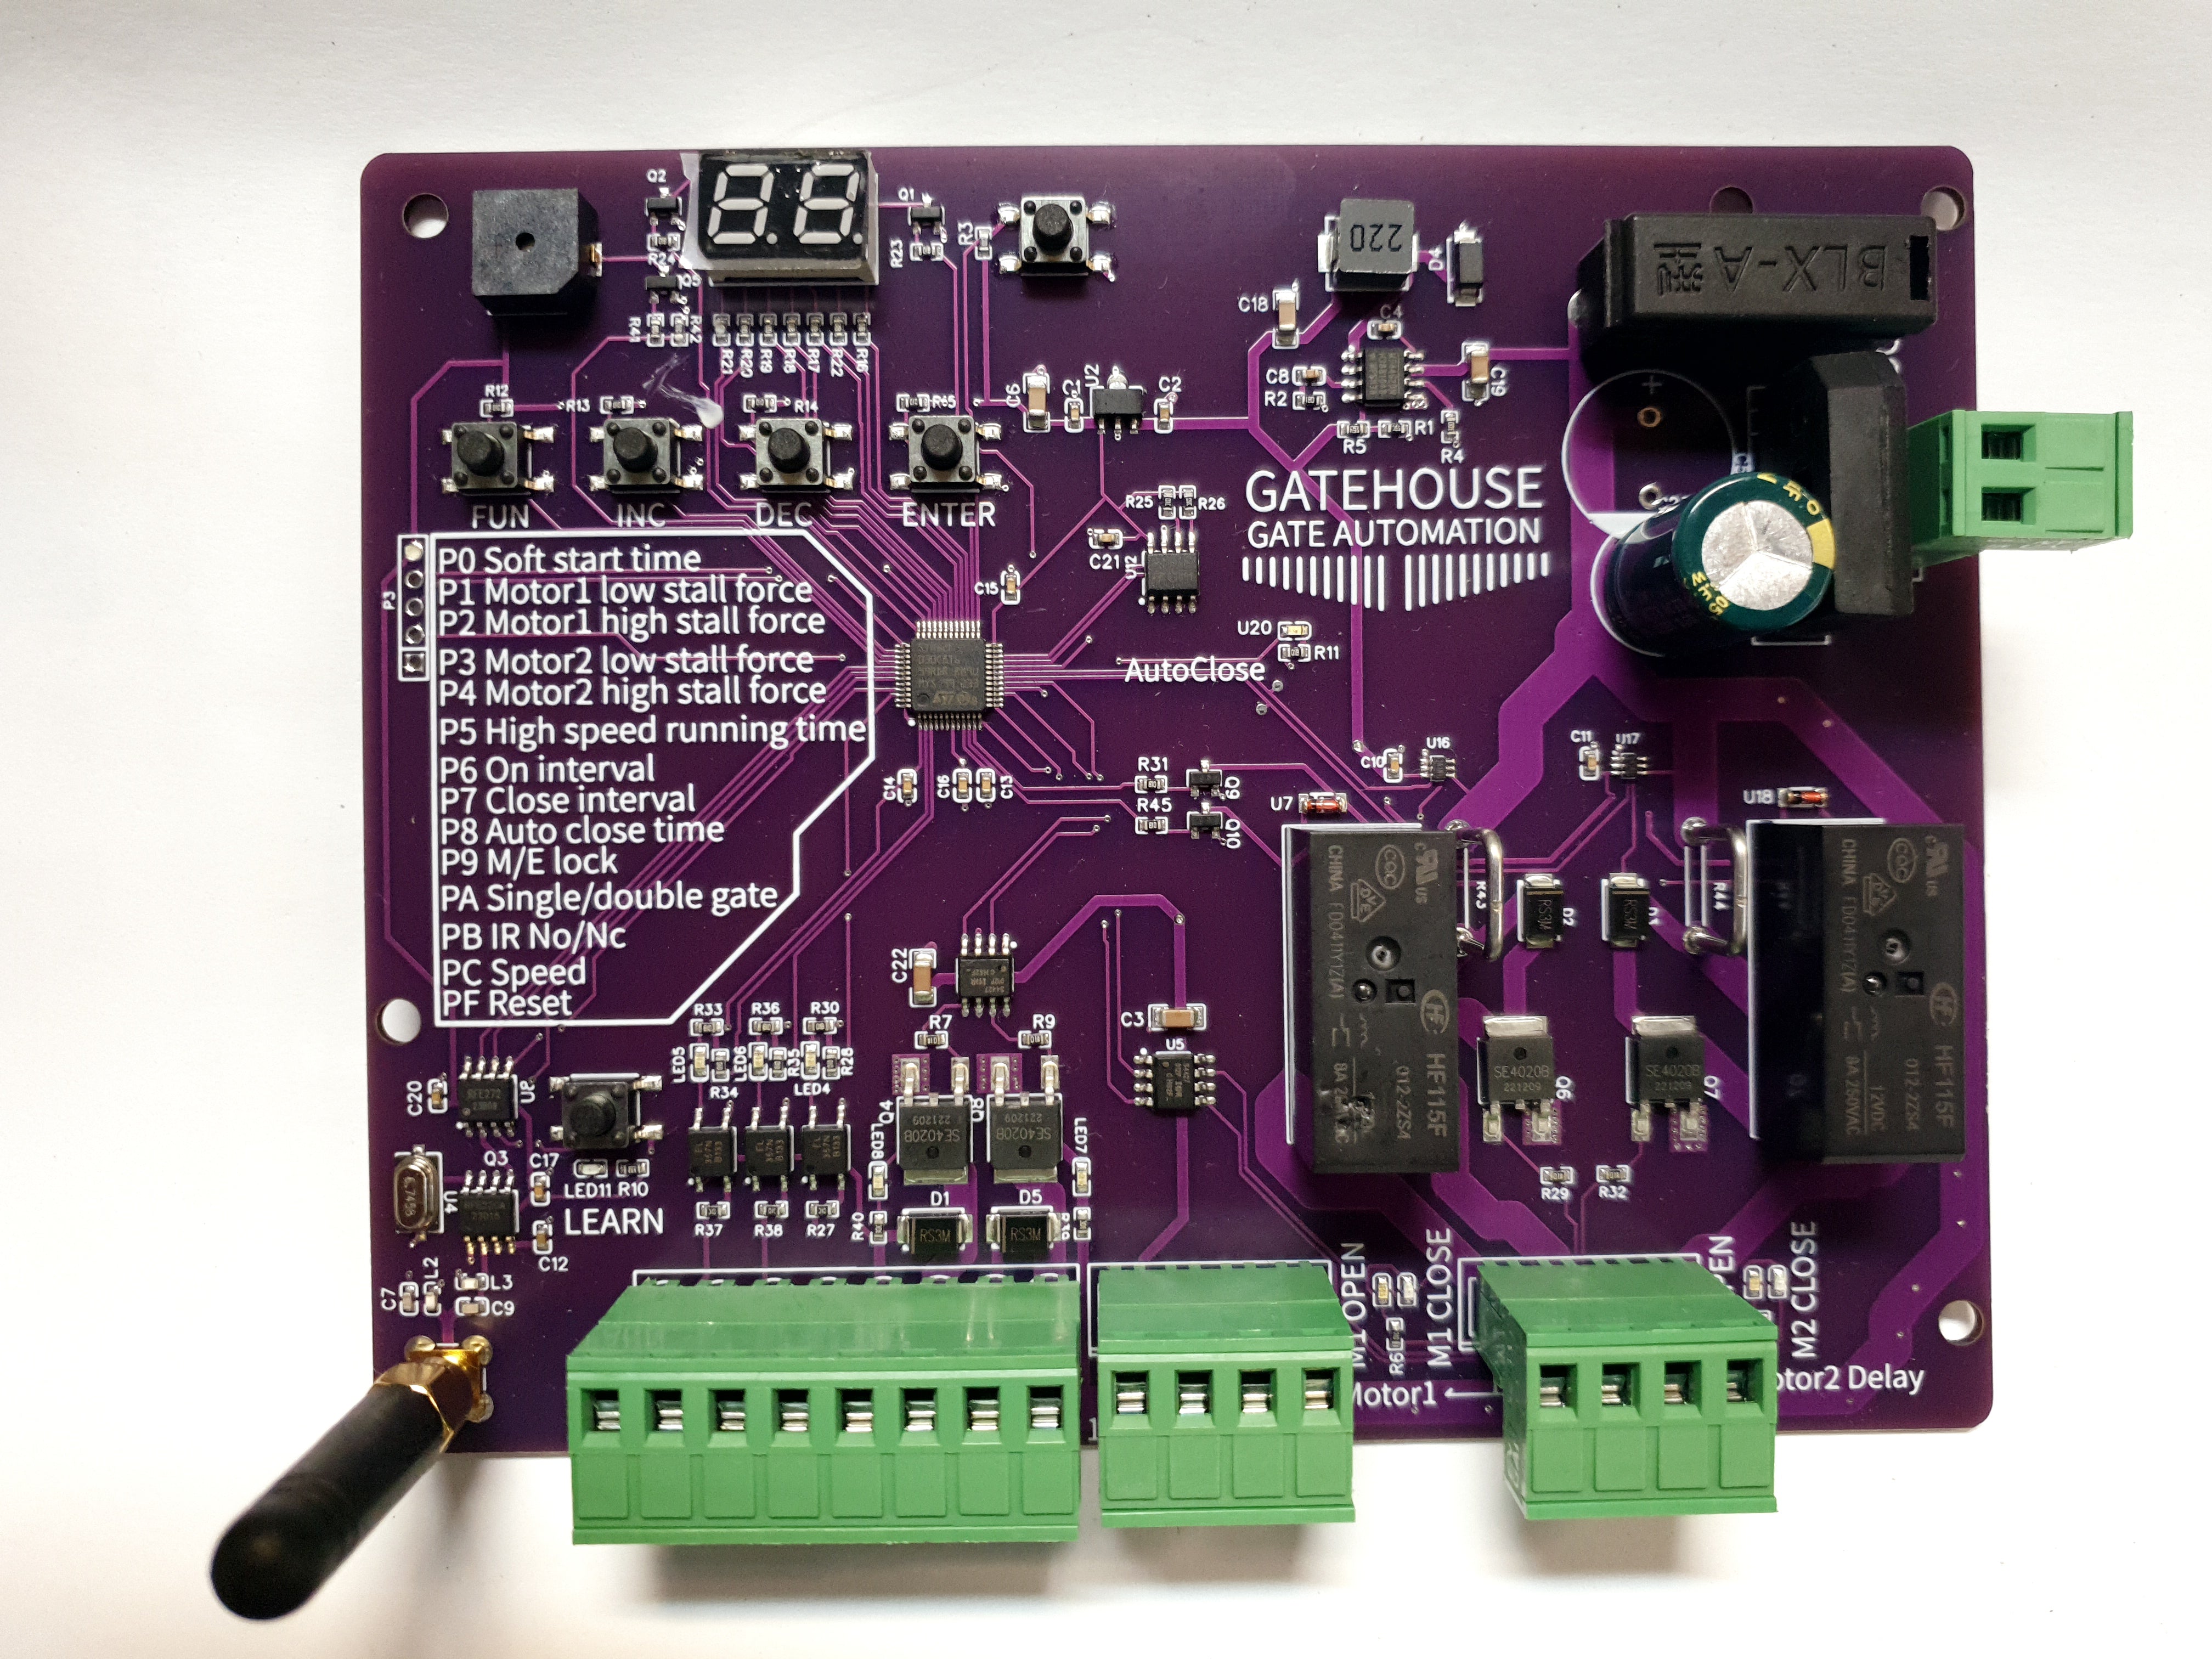 Gatehouse Security Purple Control Board - State Of The Art Electronics Built In Safety